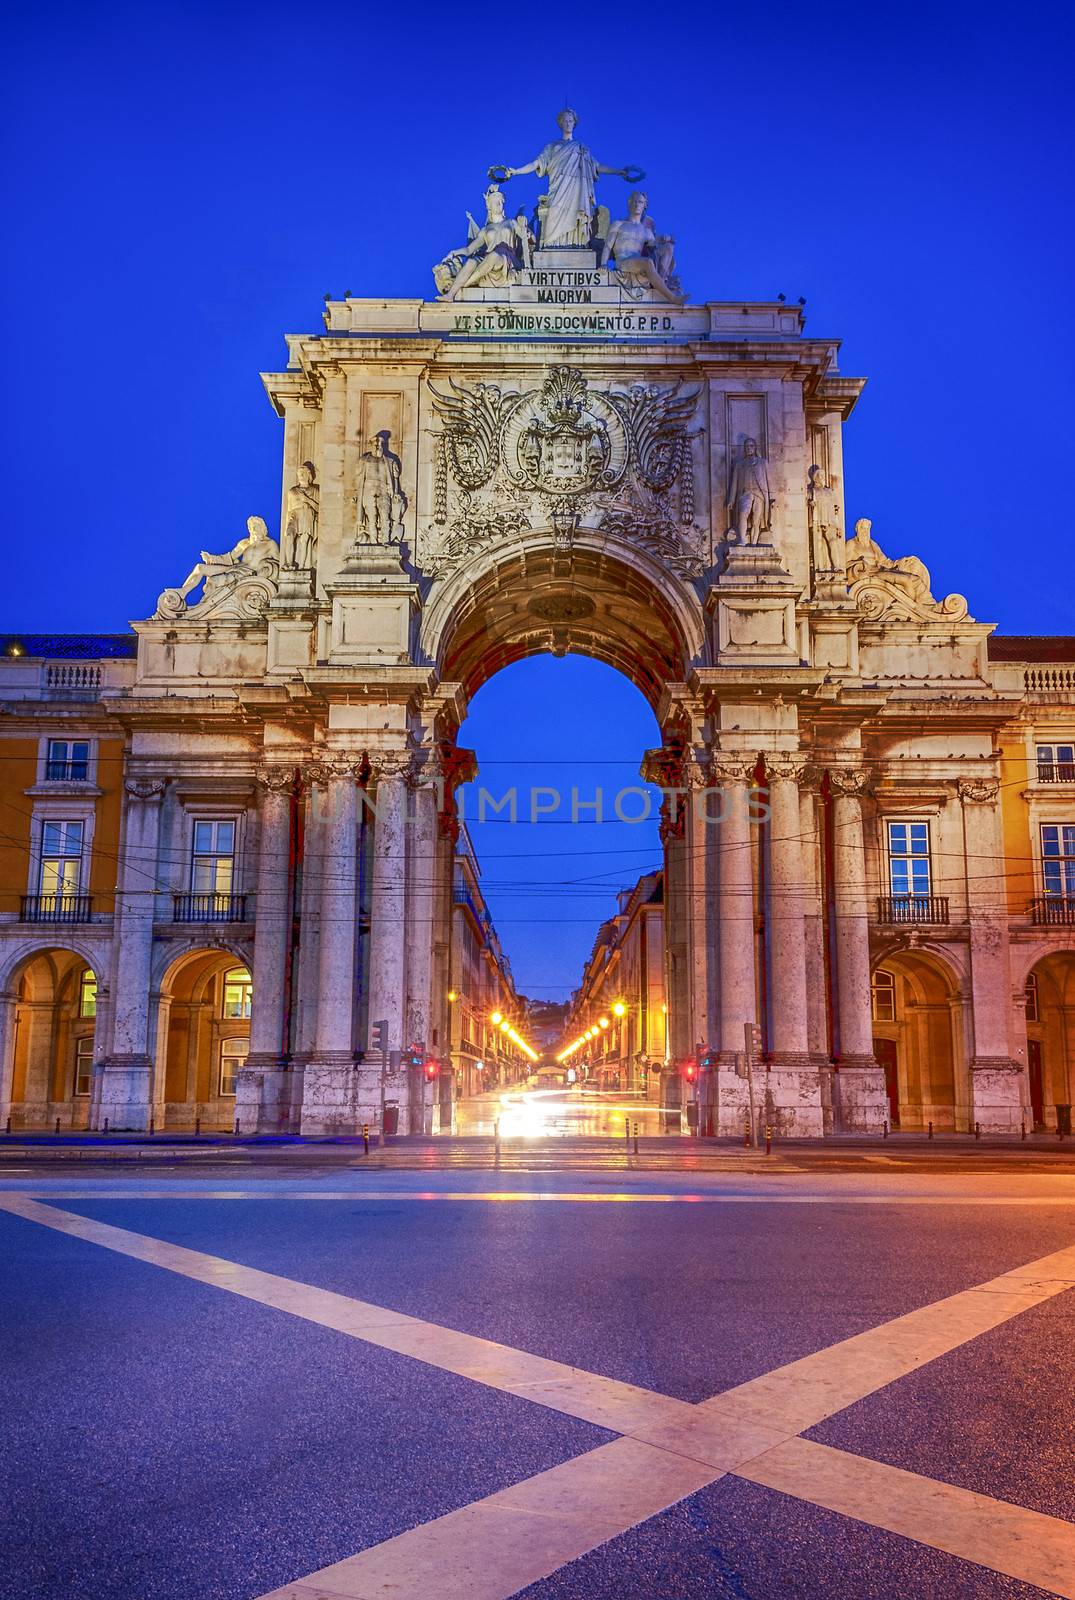 Arch of augusta in lisbon by ventdusud